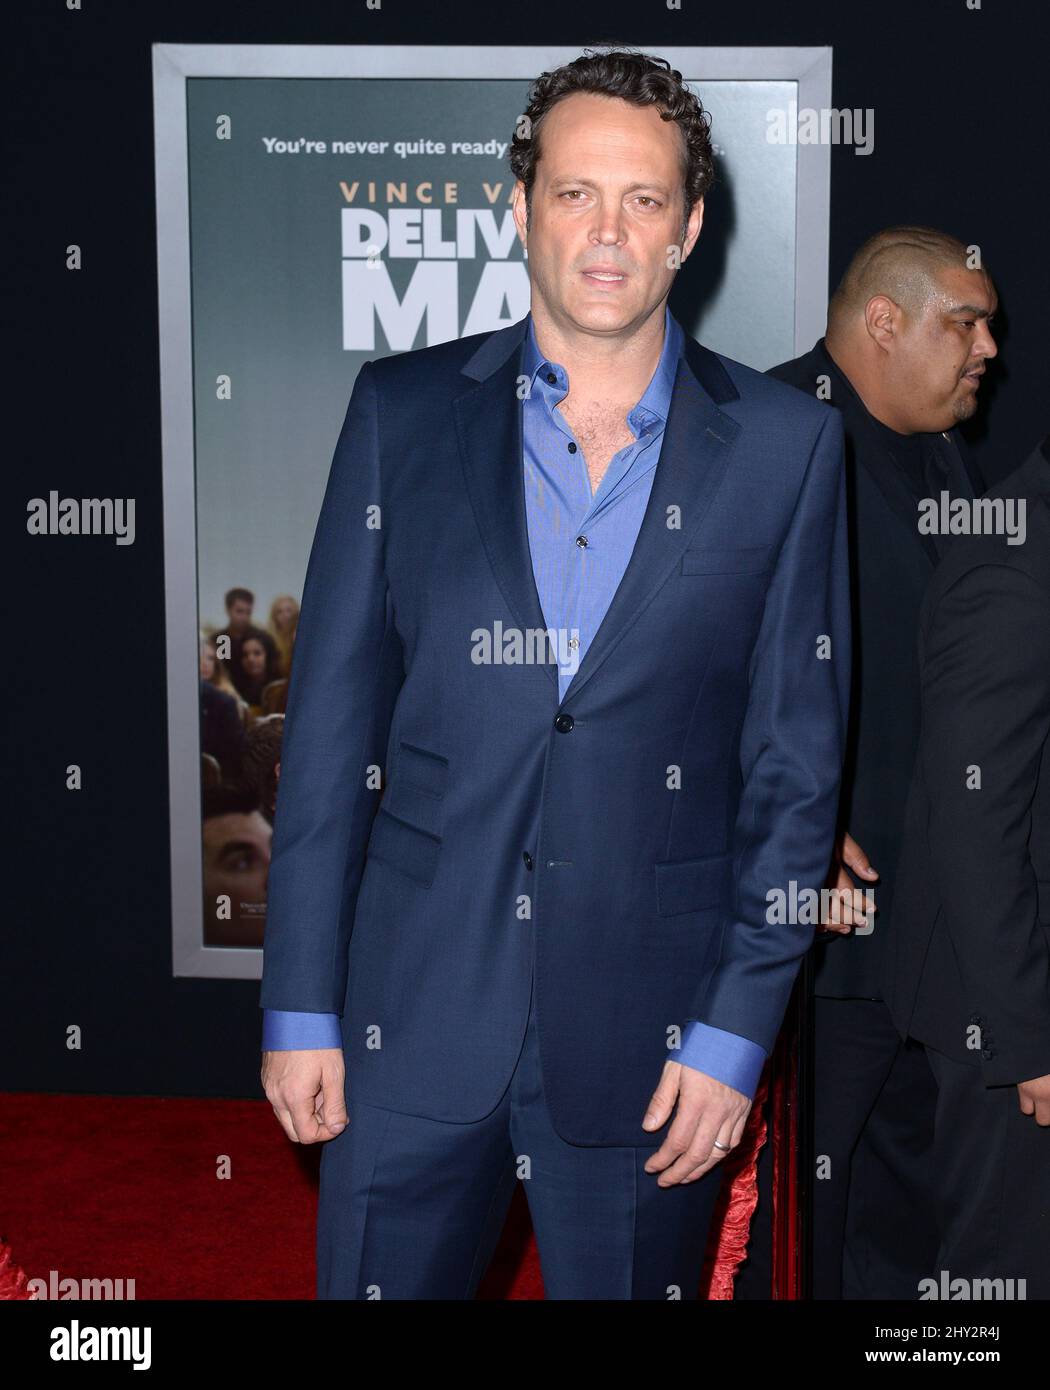 Vince Vaughn arrives at the world premiere of 'Delivery Man' at The El Capitan Theatre on Sunday, Nov. 3, 2013 in Los Angeles. Stock Photo